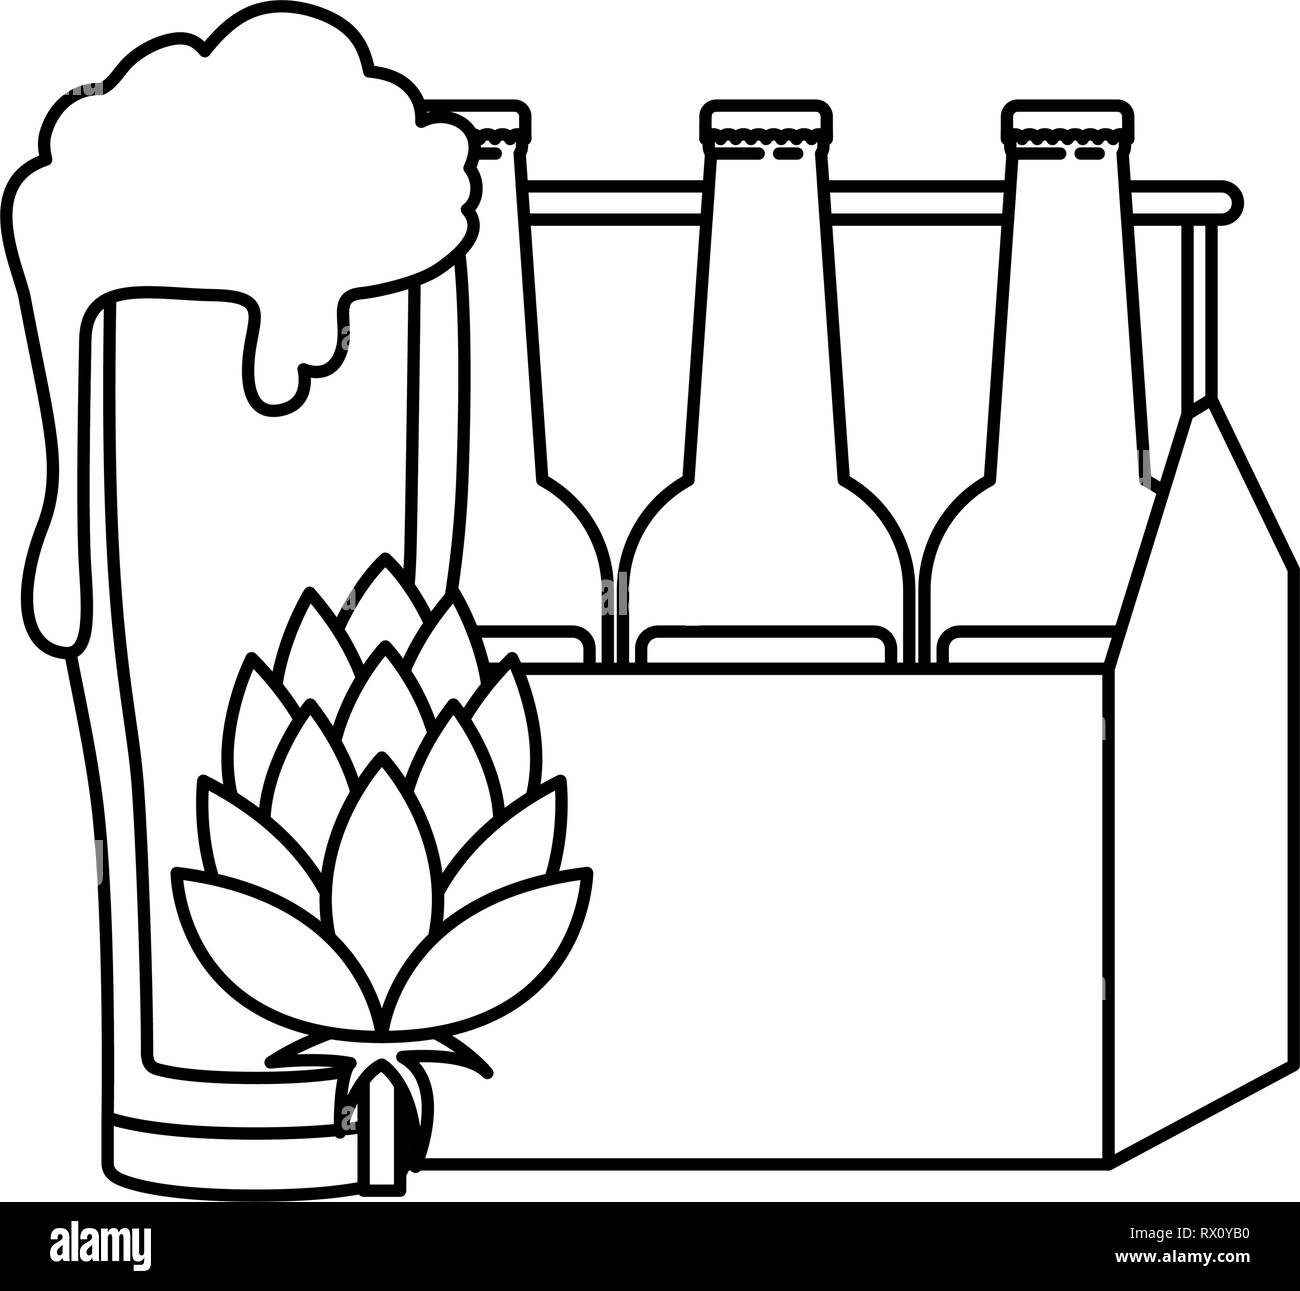 box with beer bottles and glass isolated icon Stock Vector